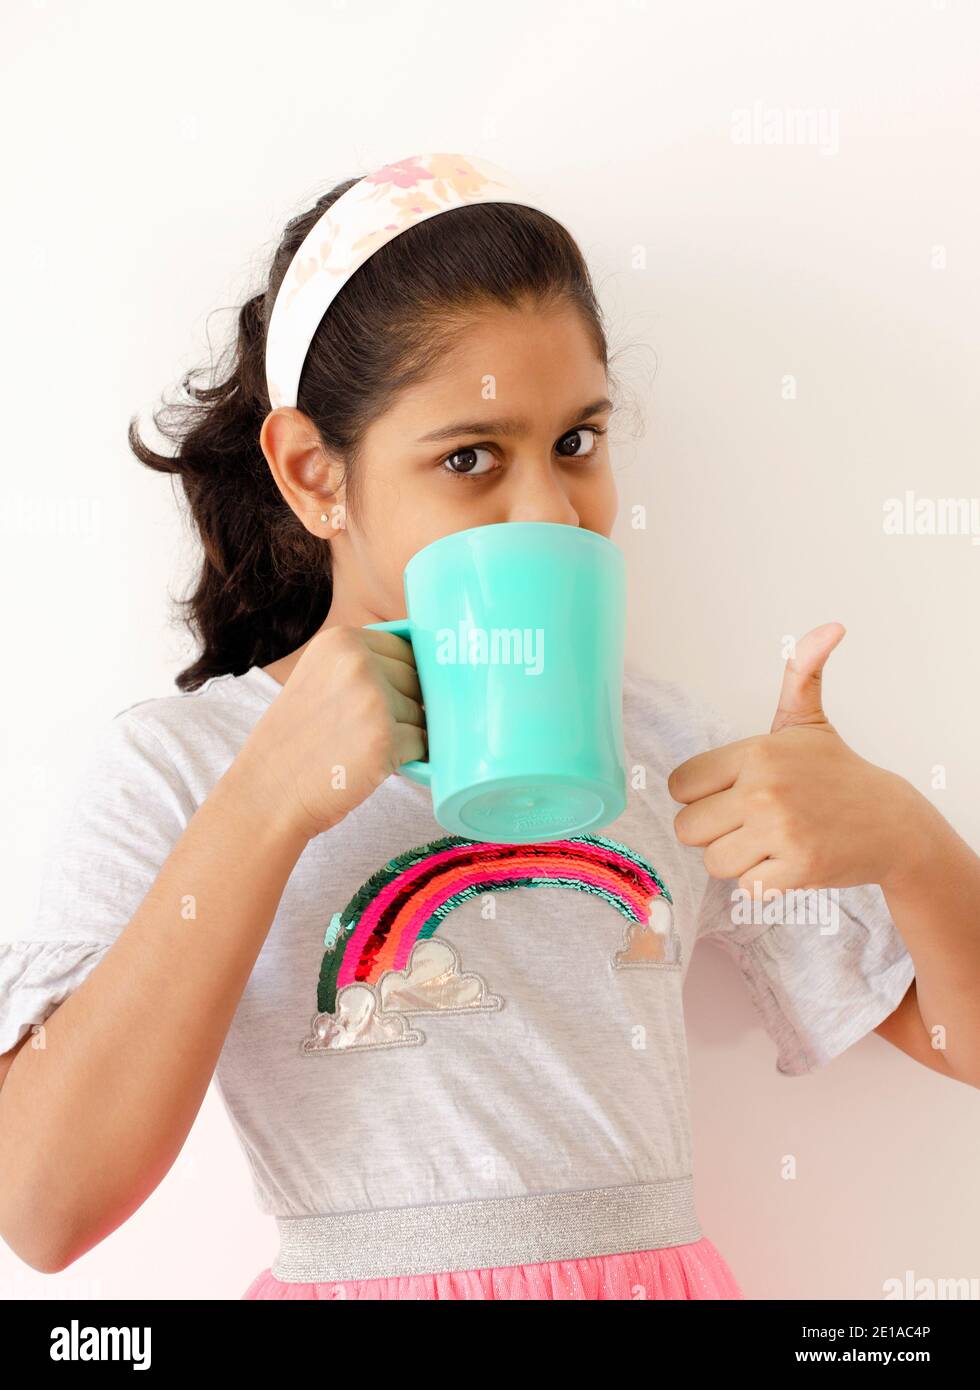 https://c8.alamy.com/comp/2E1AC4P/portrait-of-a-cute-indian-girl-drinking-from-a-bluish-green-cup-and-showing-thumbs-up-2E1AC4P.jpg